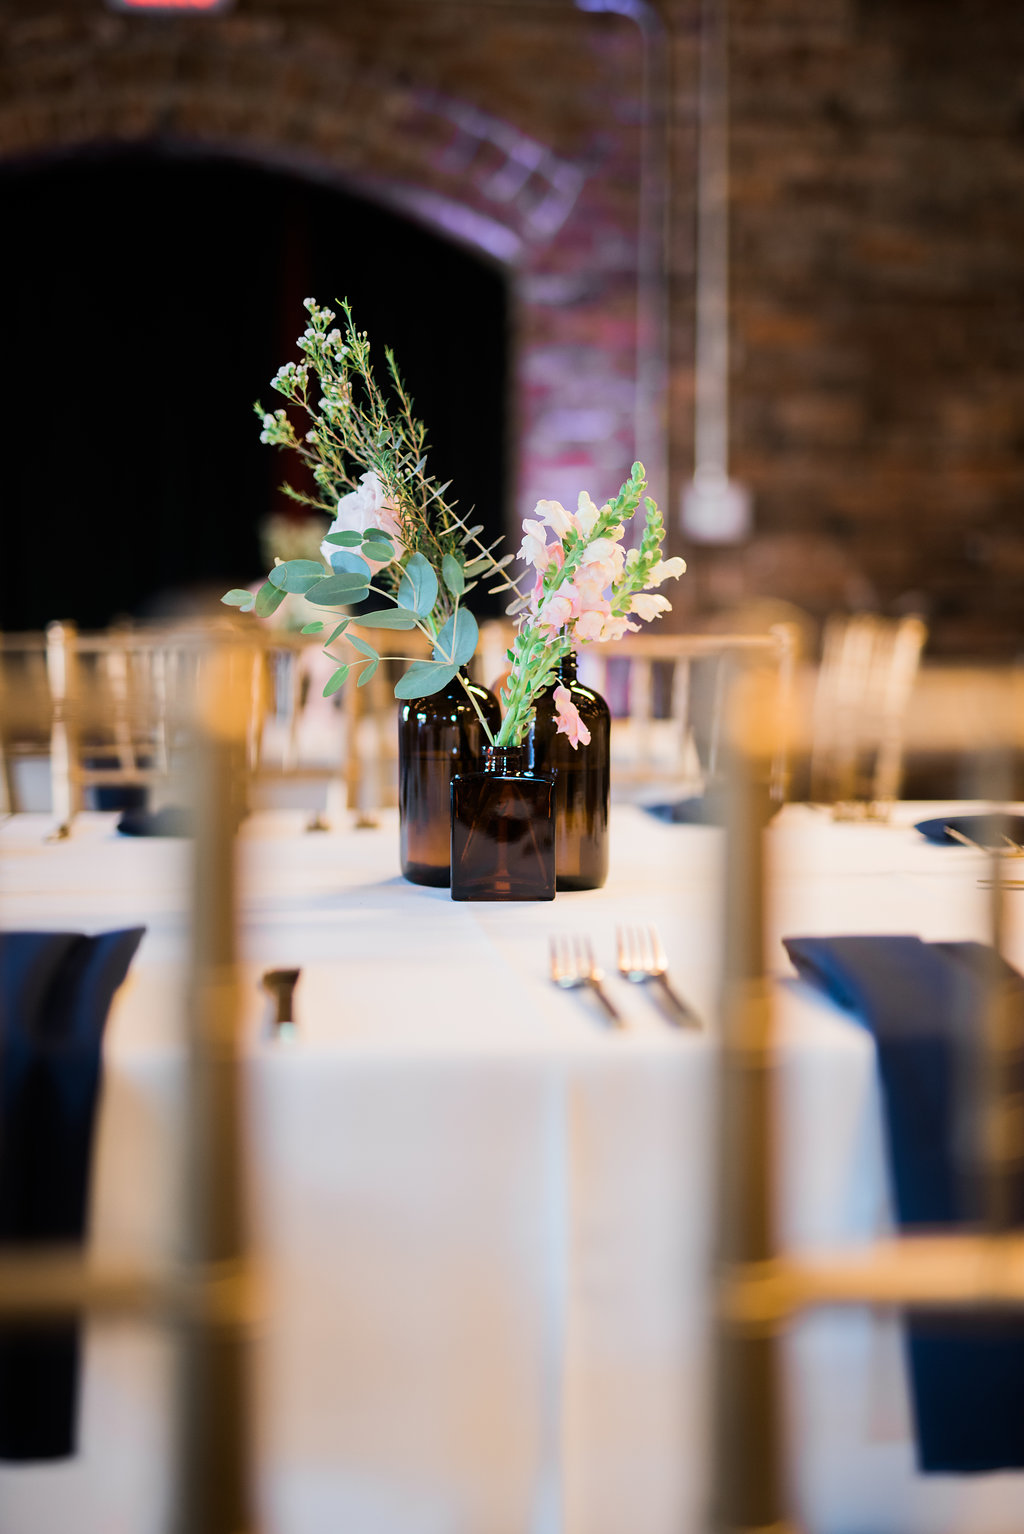 Industrial Chic Wedding Reception with Navy Blue Napkins, Gold Chiavari Chairs, Round Tables and Vintage Brown Glass Bottle Centerpiece with Natural Greenery and Pink Florals | Tampa Bay Historic Architecture Wedding Venue CL Space | Linen Rentals and Catering Tastes of Tampa Bay